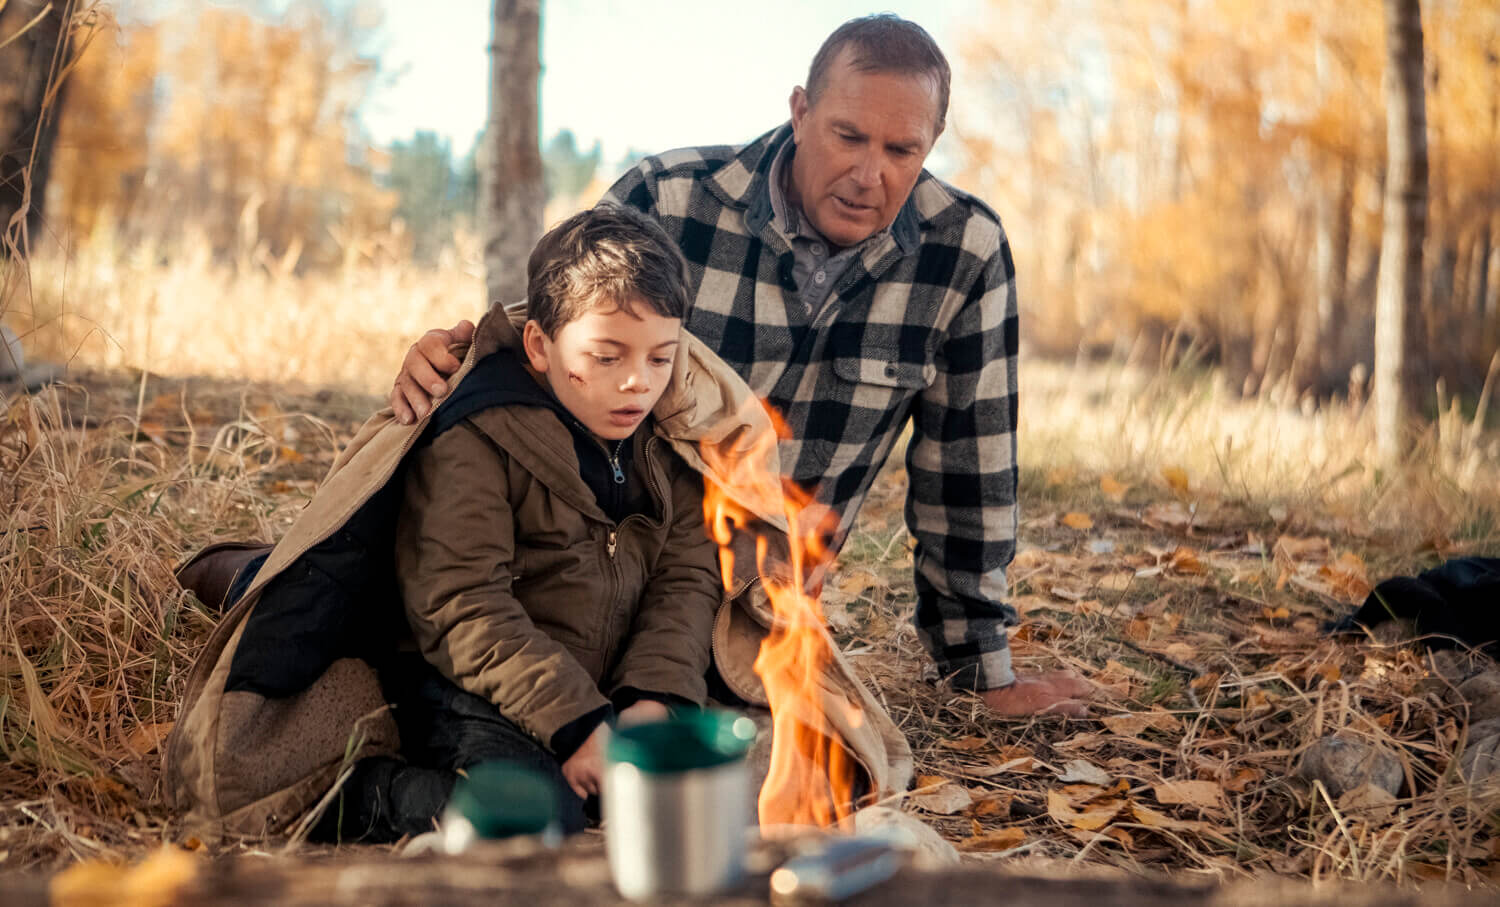 Brecken Merrill as Tate Dutton and Kevin Costner as John Dutton sitting next to a fire outside in 'Yellowstone'